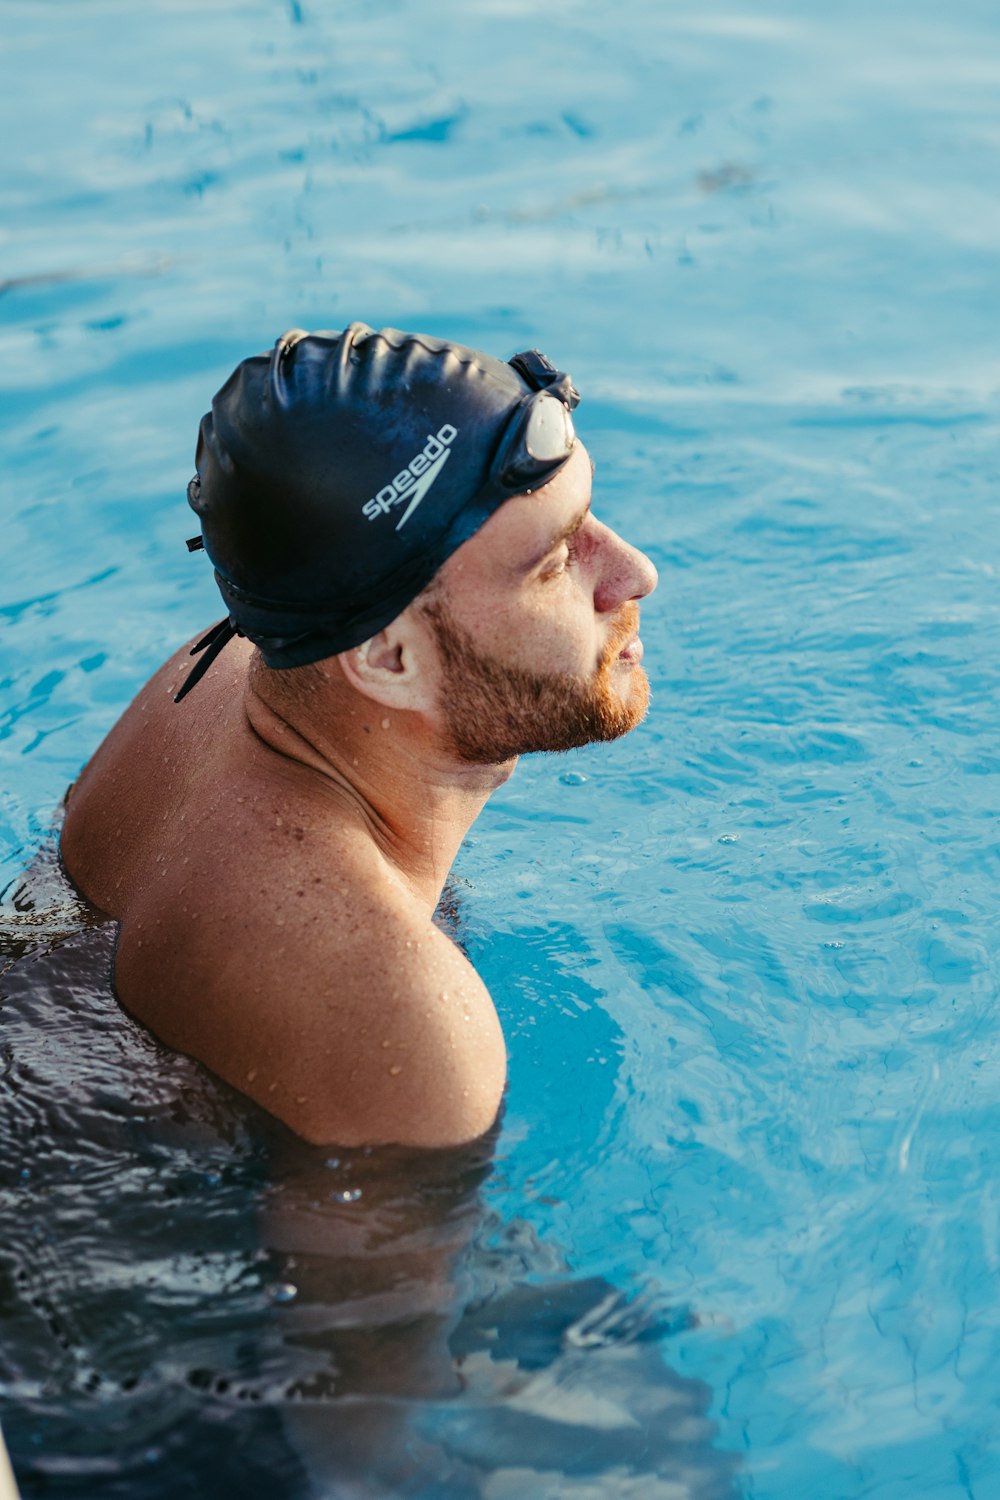 A man swimming in a pool wearing a swimming cap photo – Free Cap Image on  Unsplash